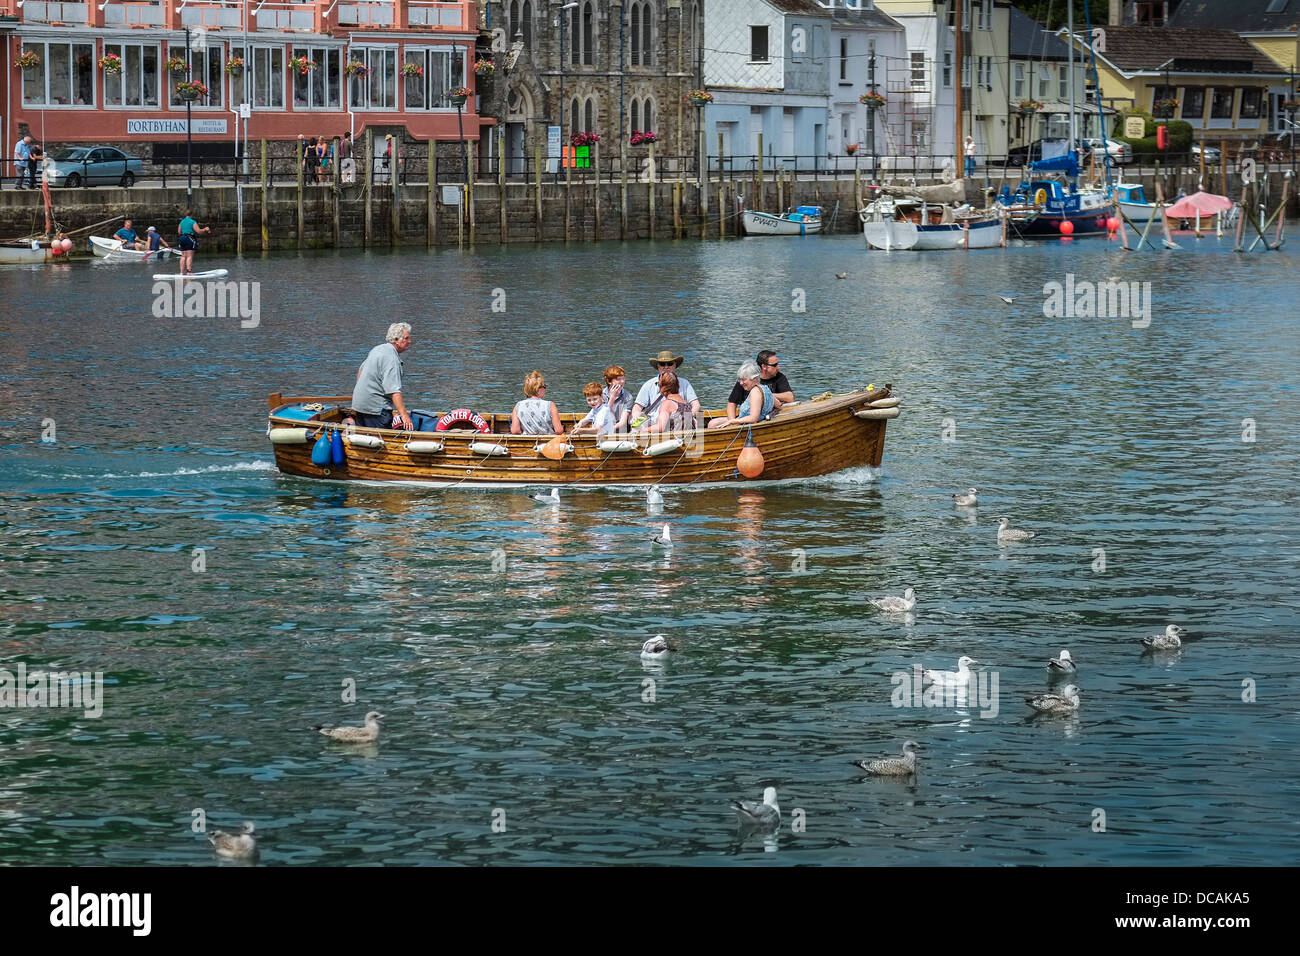 The Looe Ferry carrying passengers across the river. Stock Photo